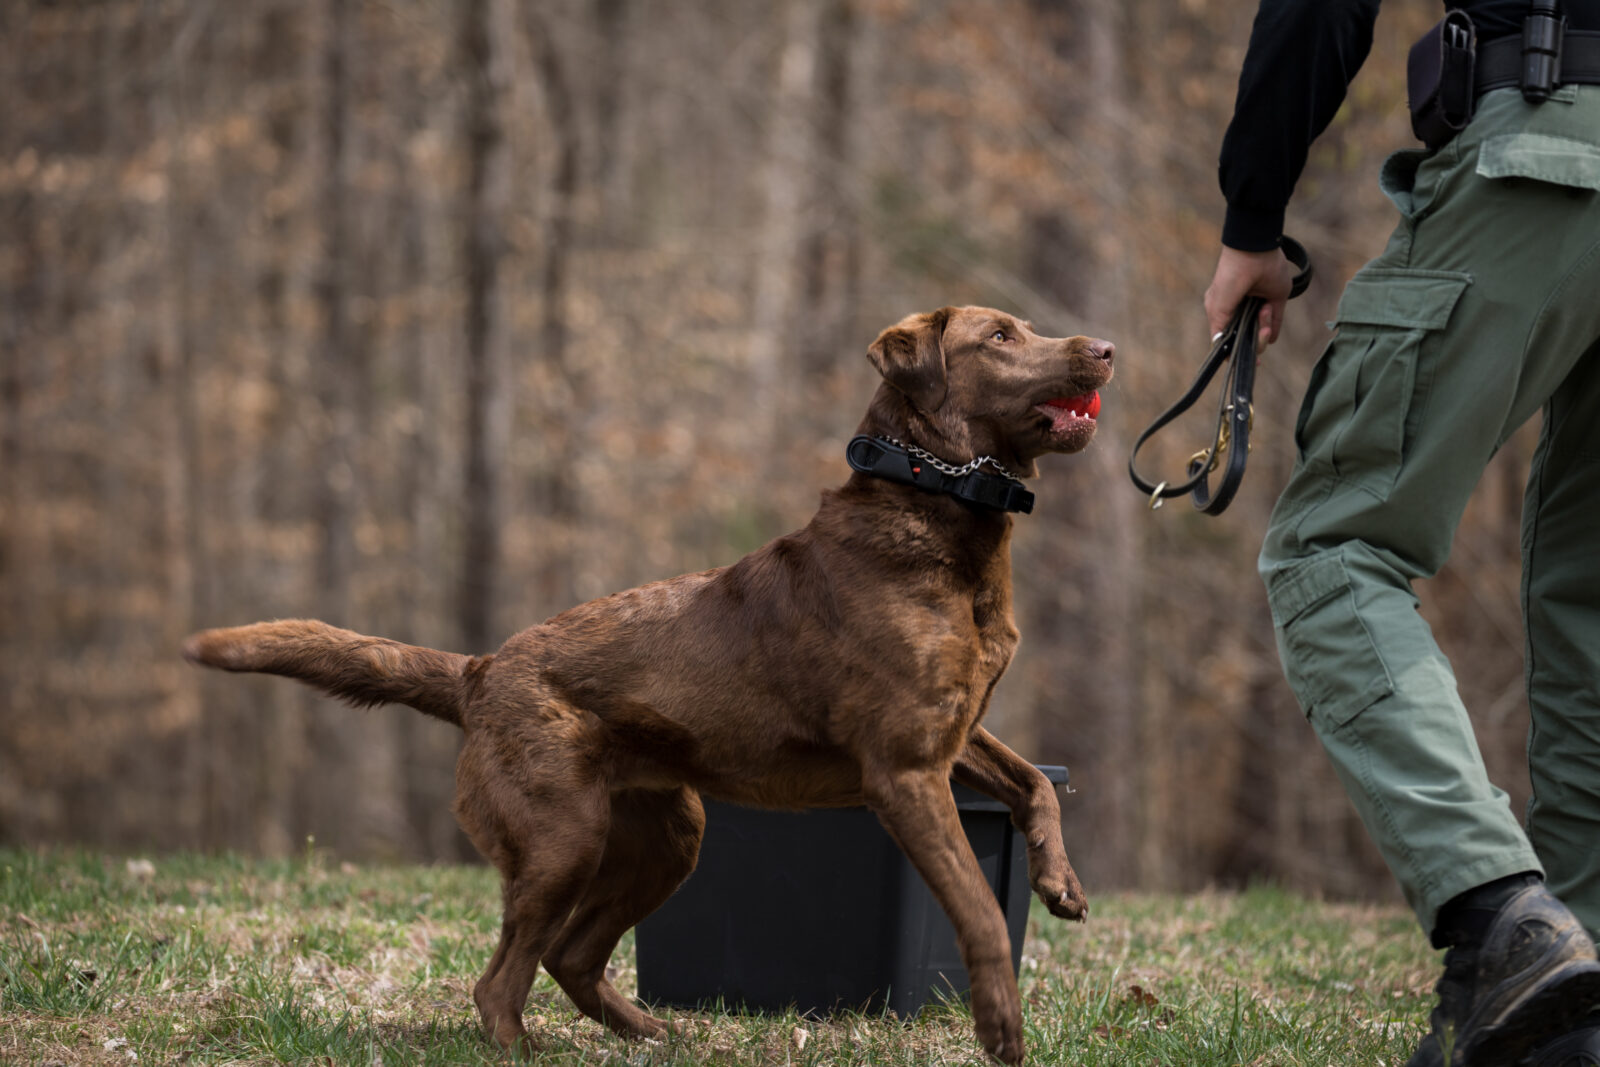 Bruno enjoys some play reward after a successful wildlife detection exercise.